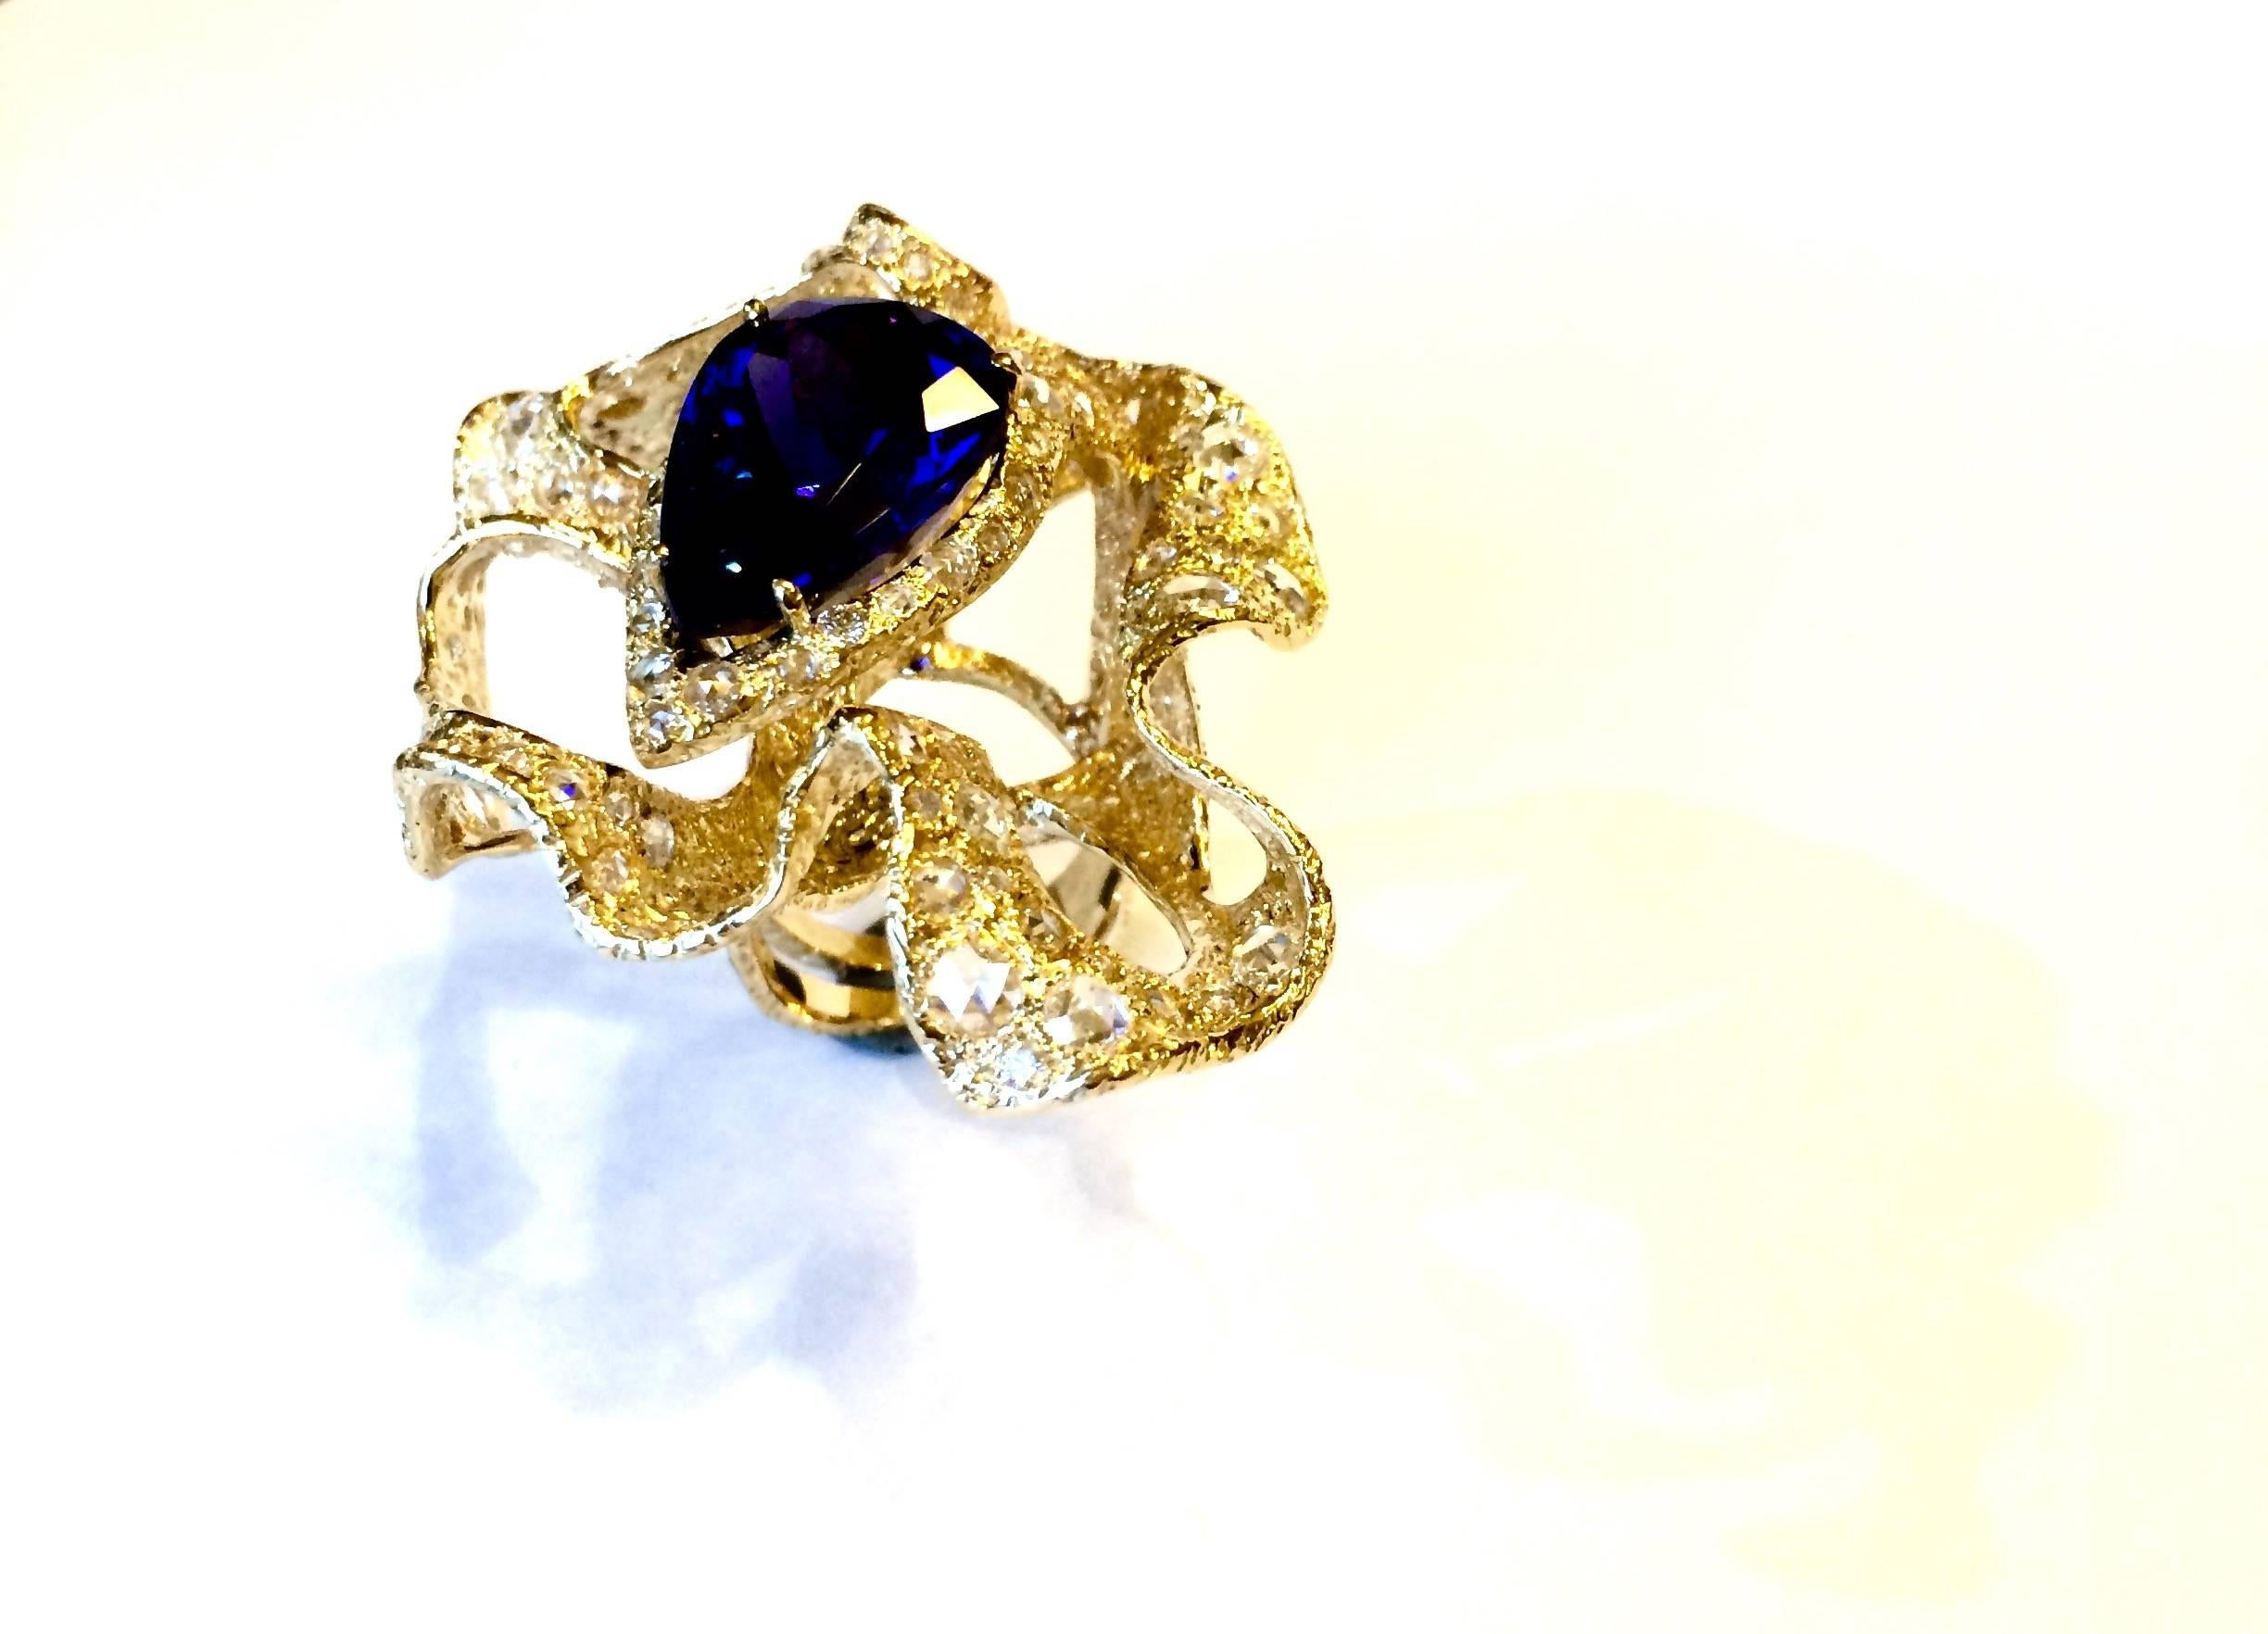 
18 Carats Gold Cocktail Ring Features a Stunning Natural Vivid Blue 15,41 Carat Pear Shape Tanzanite set with Rosette Cut and Round Diamonds.

This unusual ring is part of Andrea Ghelli's last collection, inspired by nature and flowers. 
It has